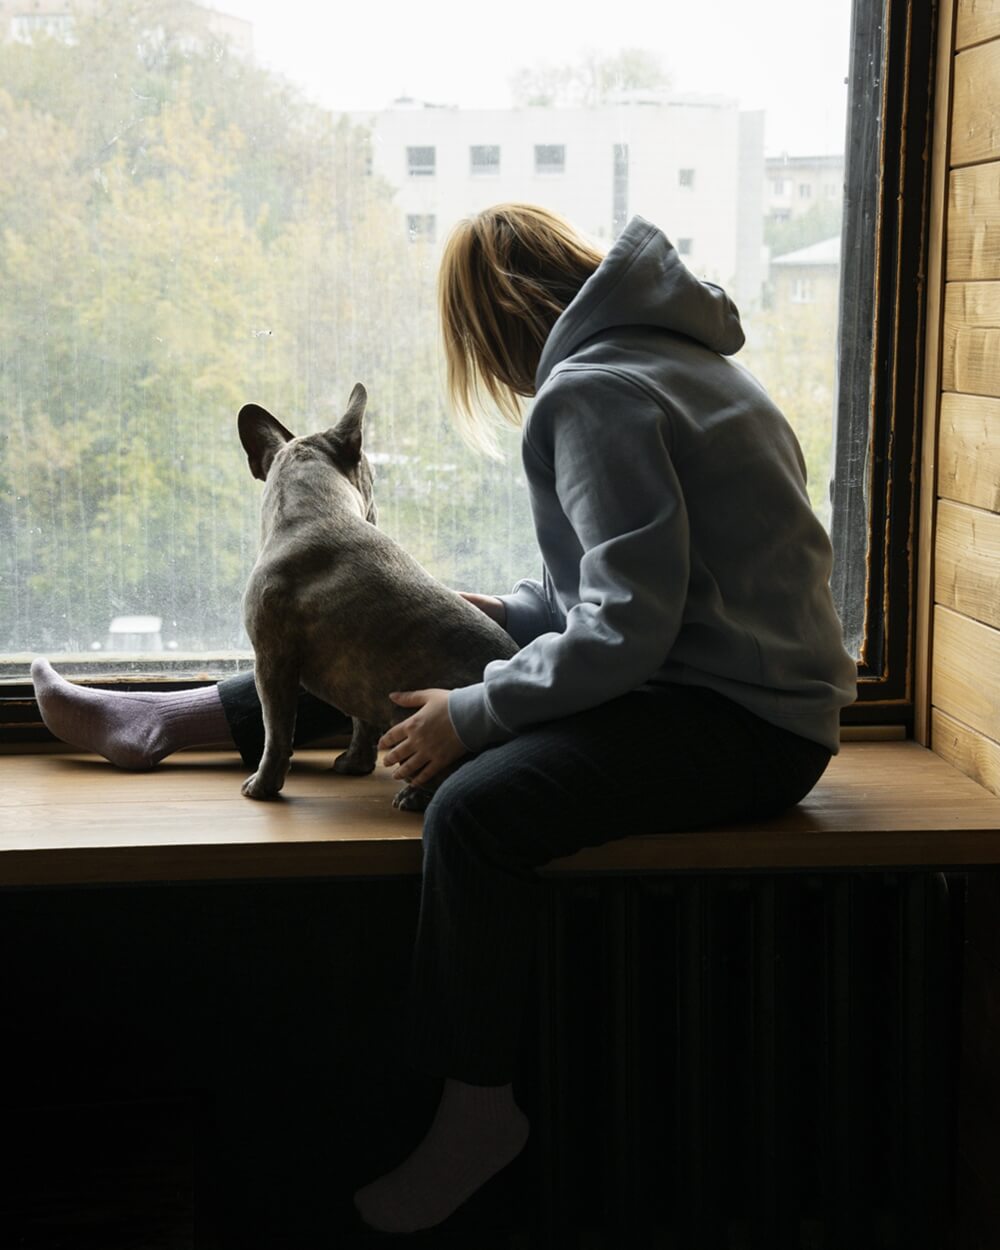 Dog lifestyle care with a parent, enjoying the view from the window